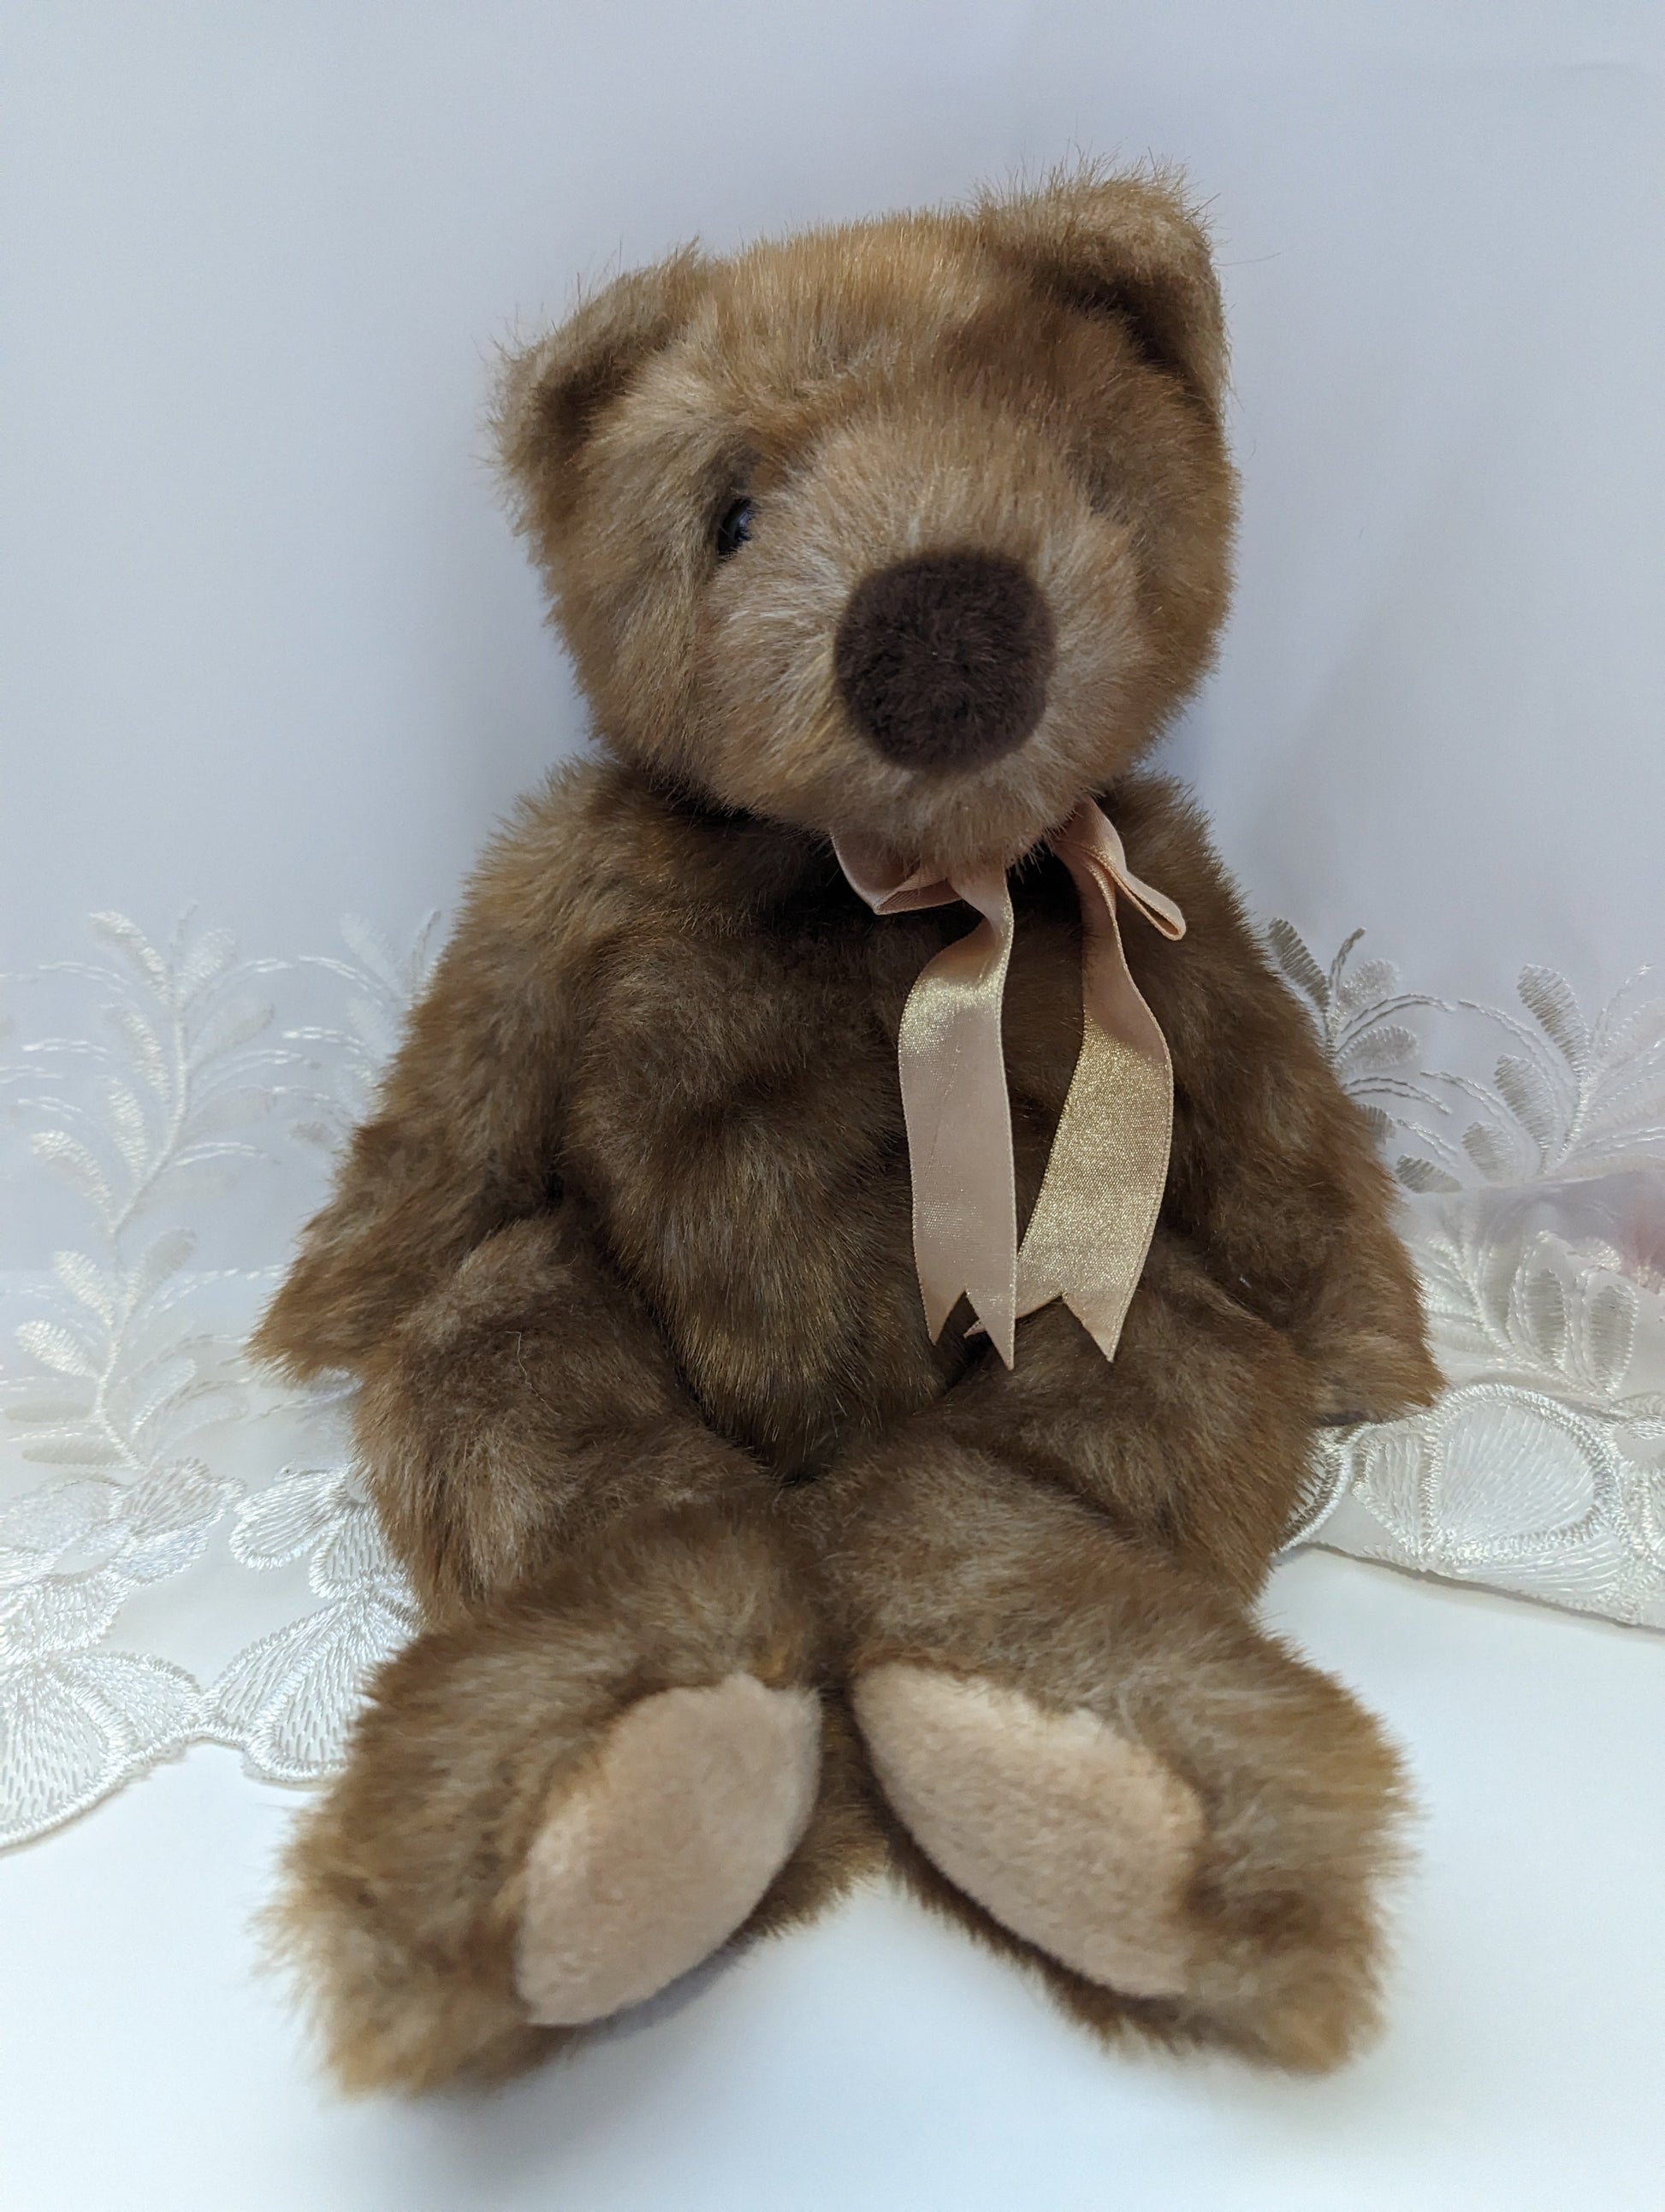 Ty Classic Collection - Ginger The Teddy Bear (13in) No Hang Tag - Vintage Beanies Canada